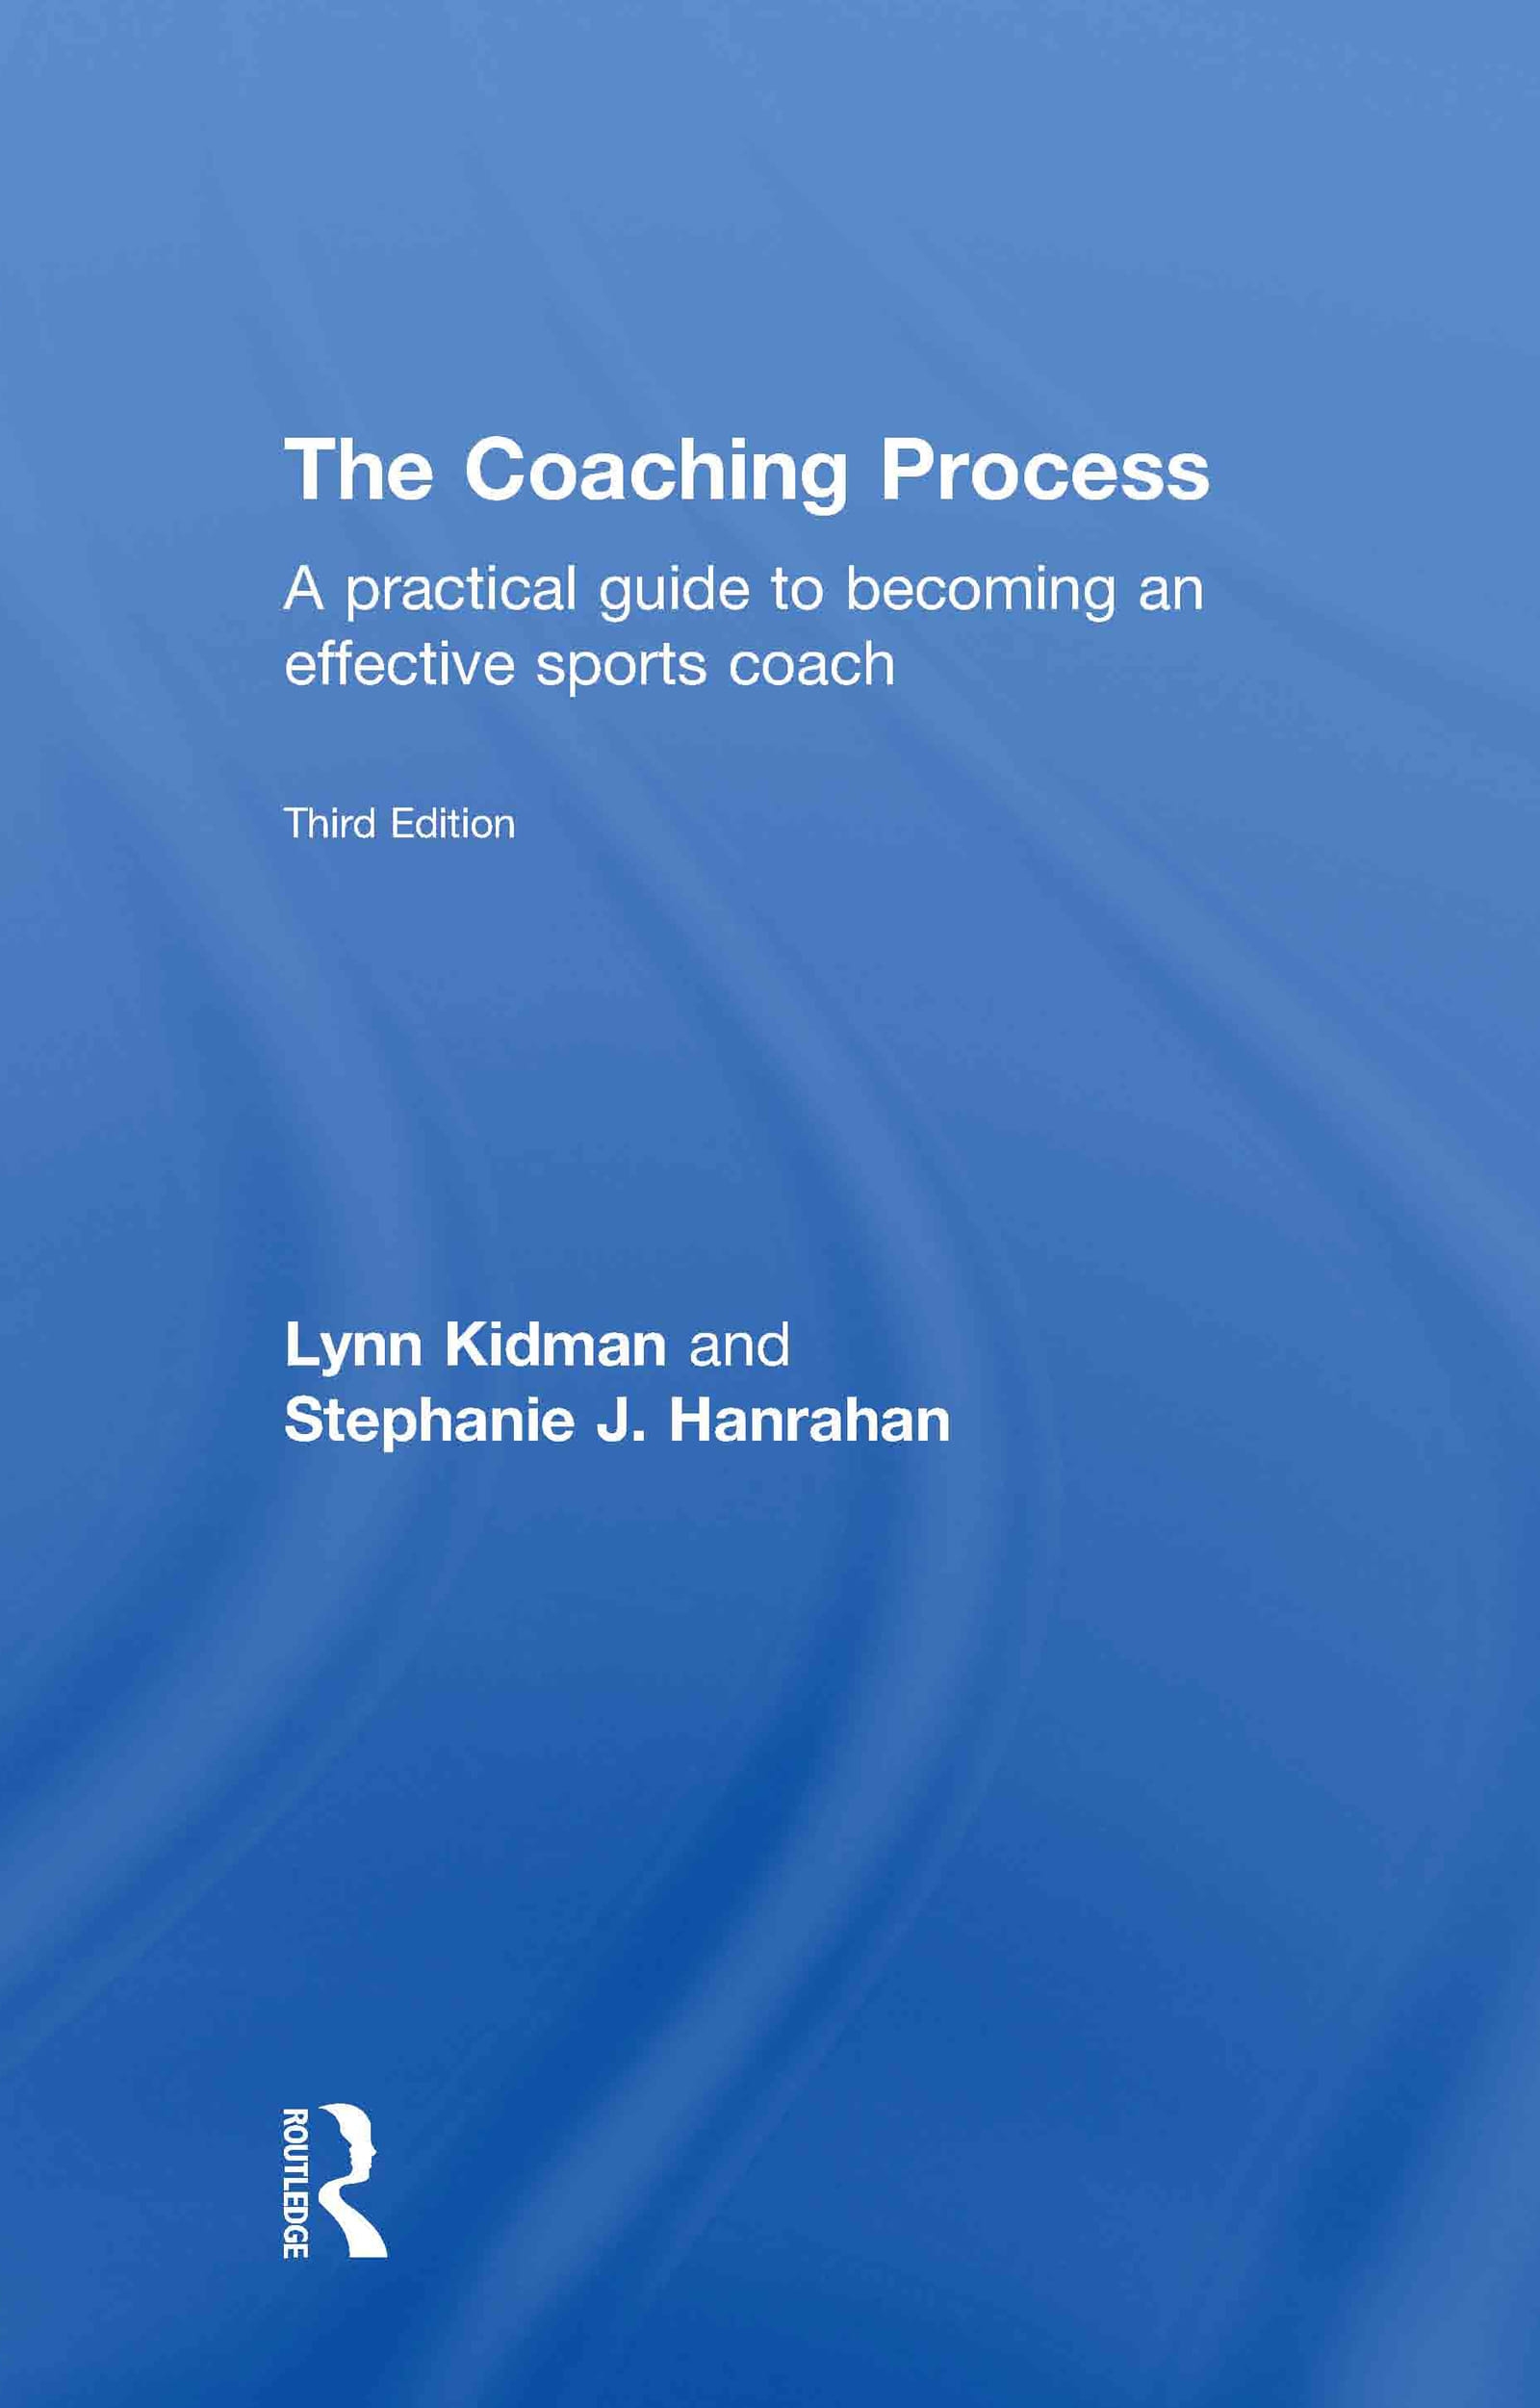 The Coaching Process: A Practical Guide to Becoming an Effective Sports Coach